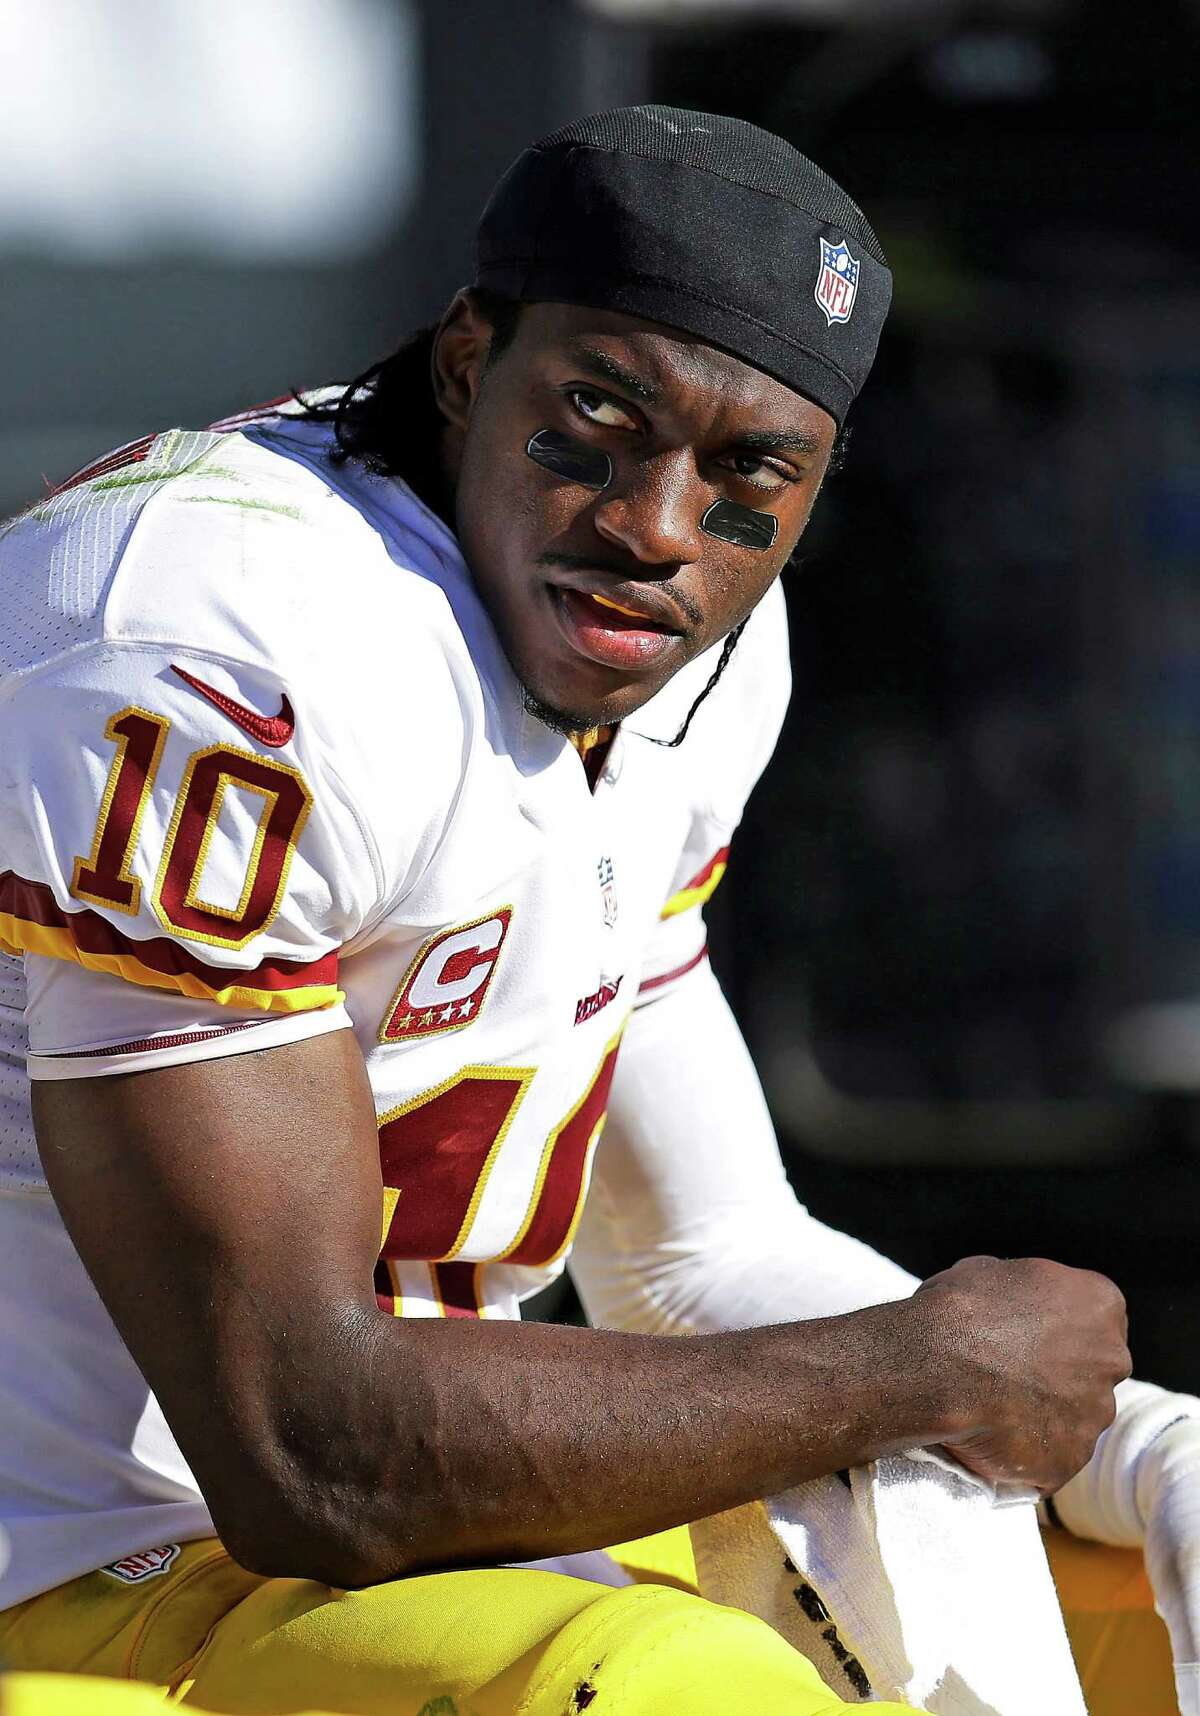 Washington Redskins quarterback Robert Griffin III (10) during the second half of an NFL football game against the Oakland Raiders in Oakland, Calif., Sunday, Sept. 29, 2013. (AP Photo/Ben Margot)